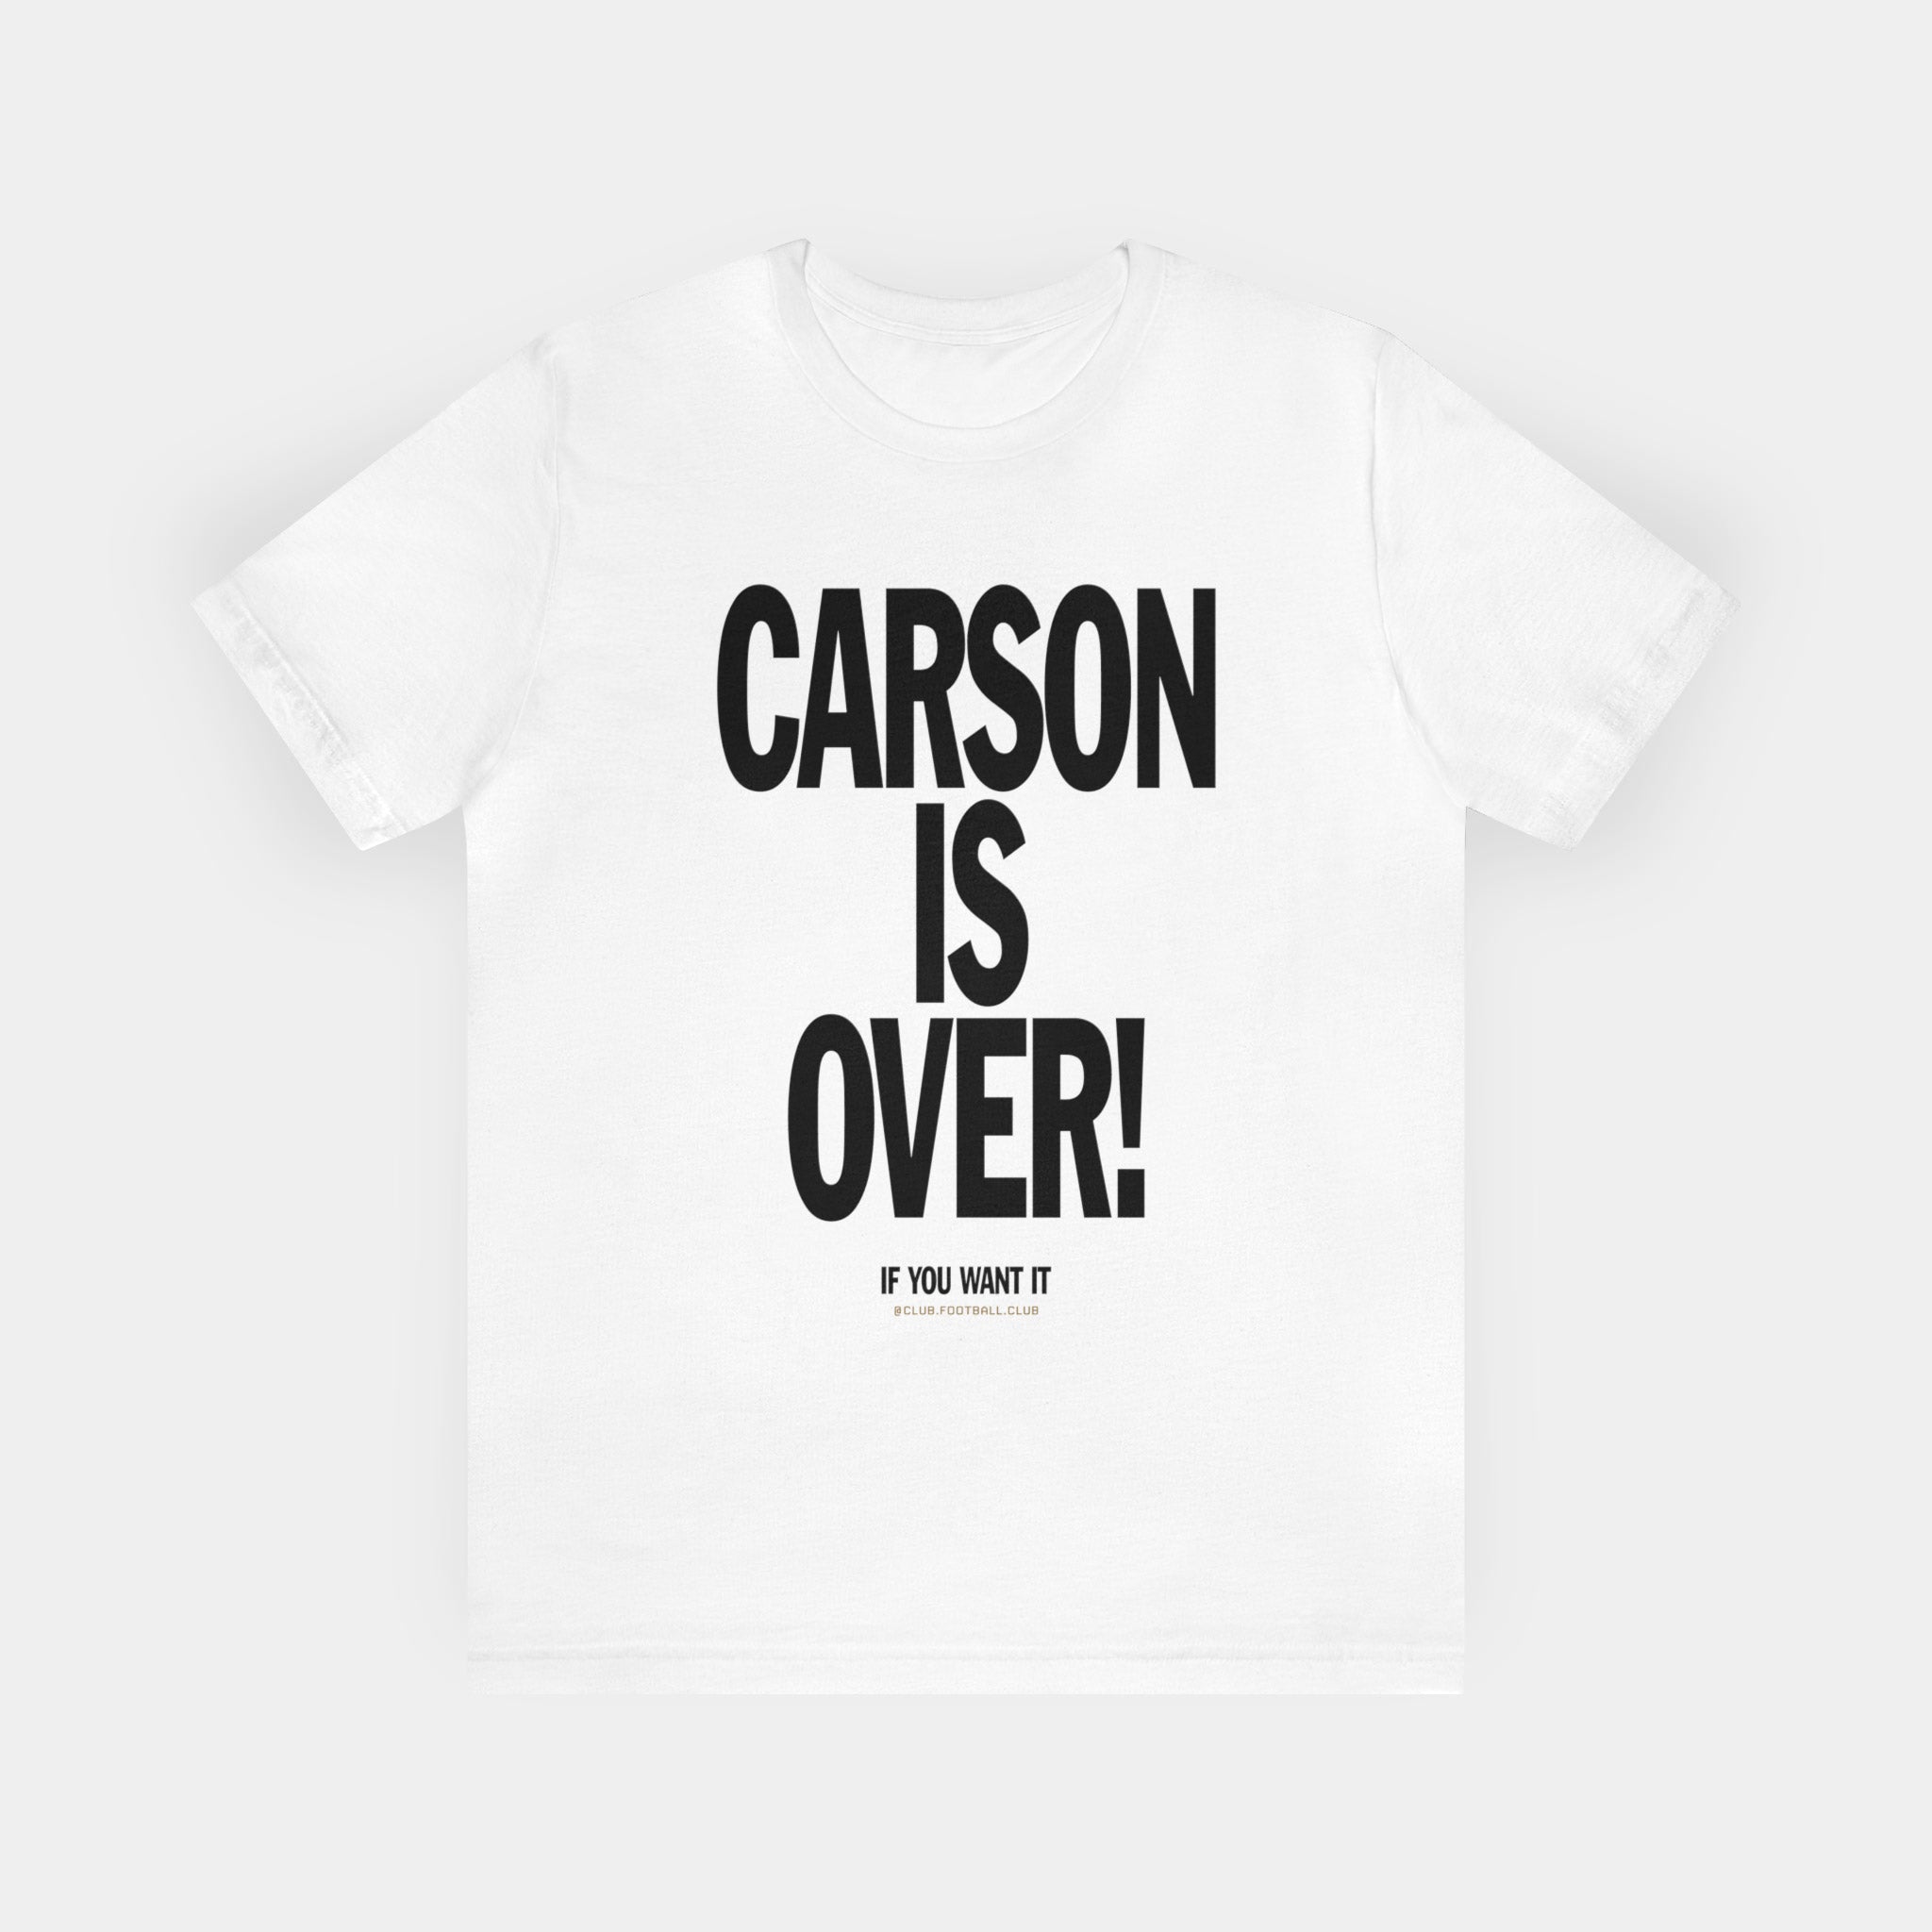 Carson Is Over If You Want It (LAFC) T-shirt